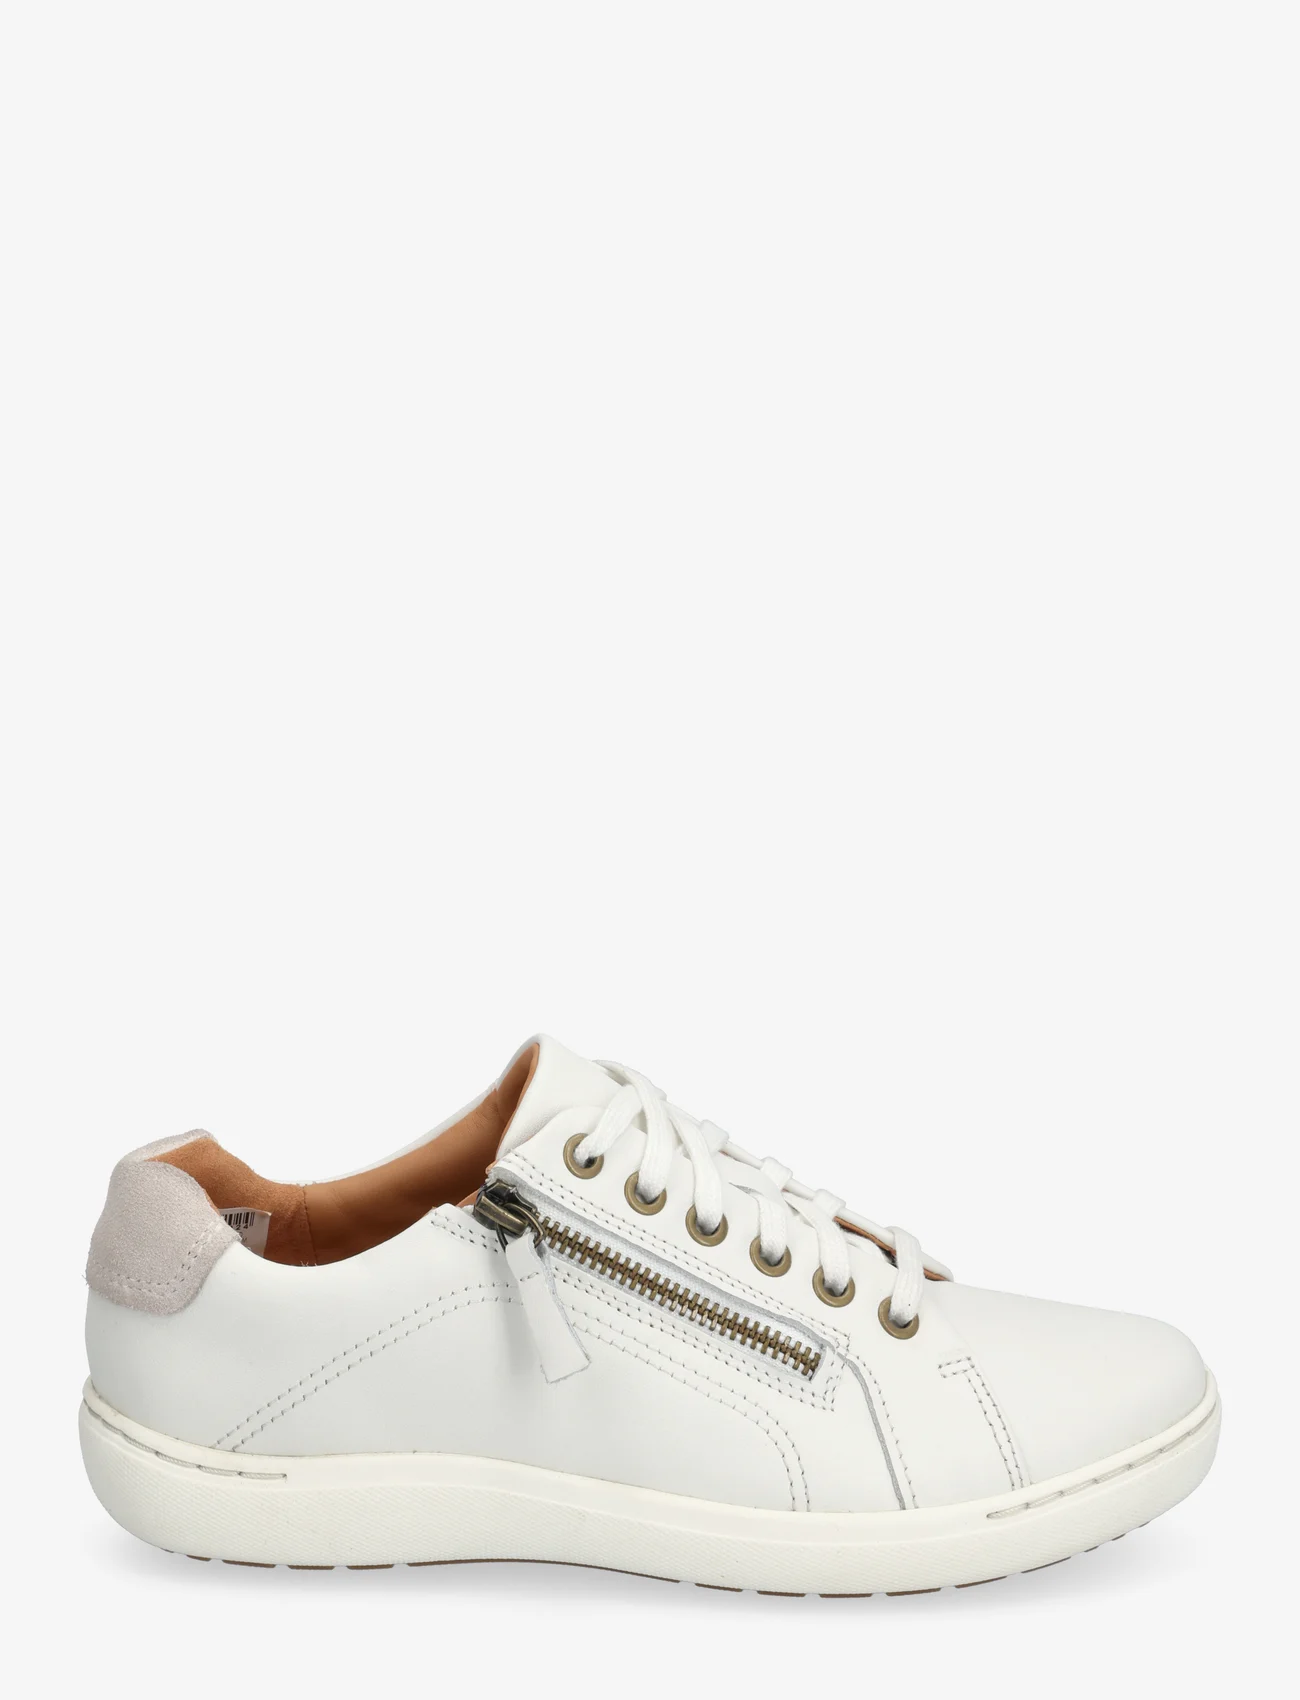 Clarks - Nalle Lace D - lage sneakers - 1255 white leather - 1